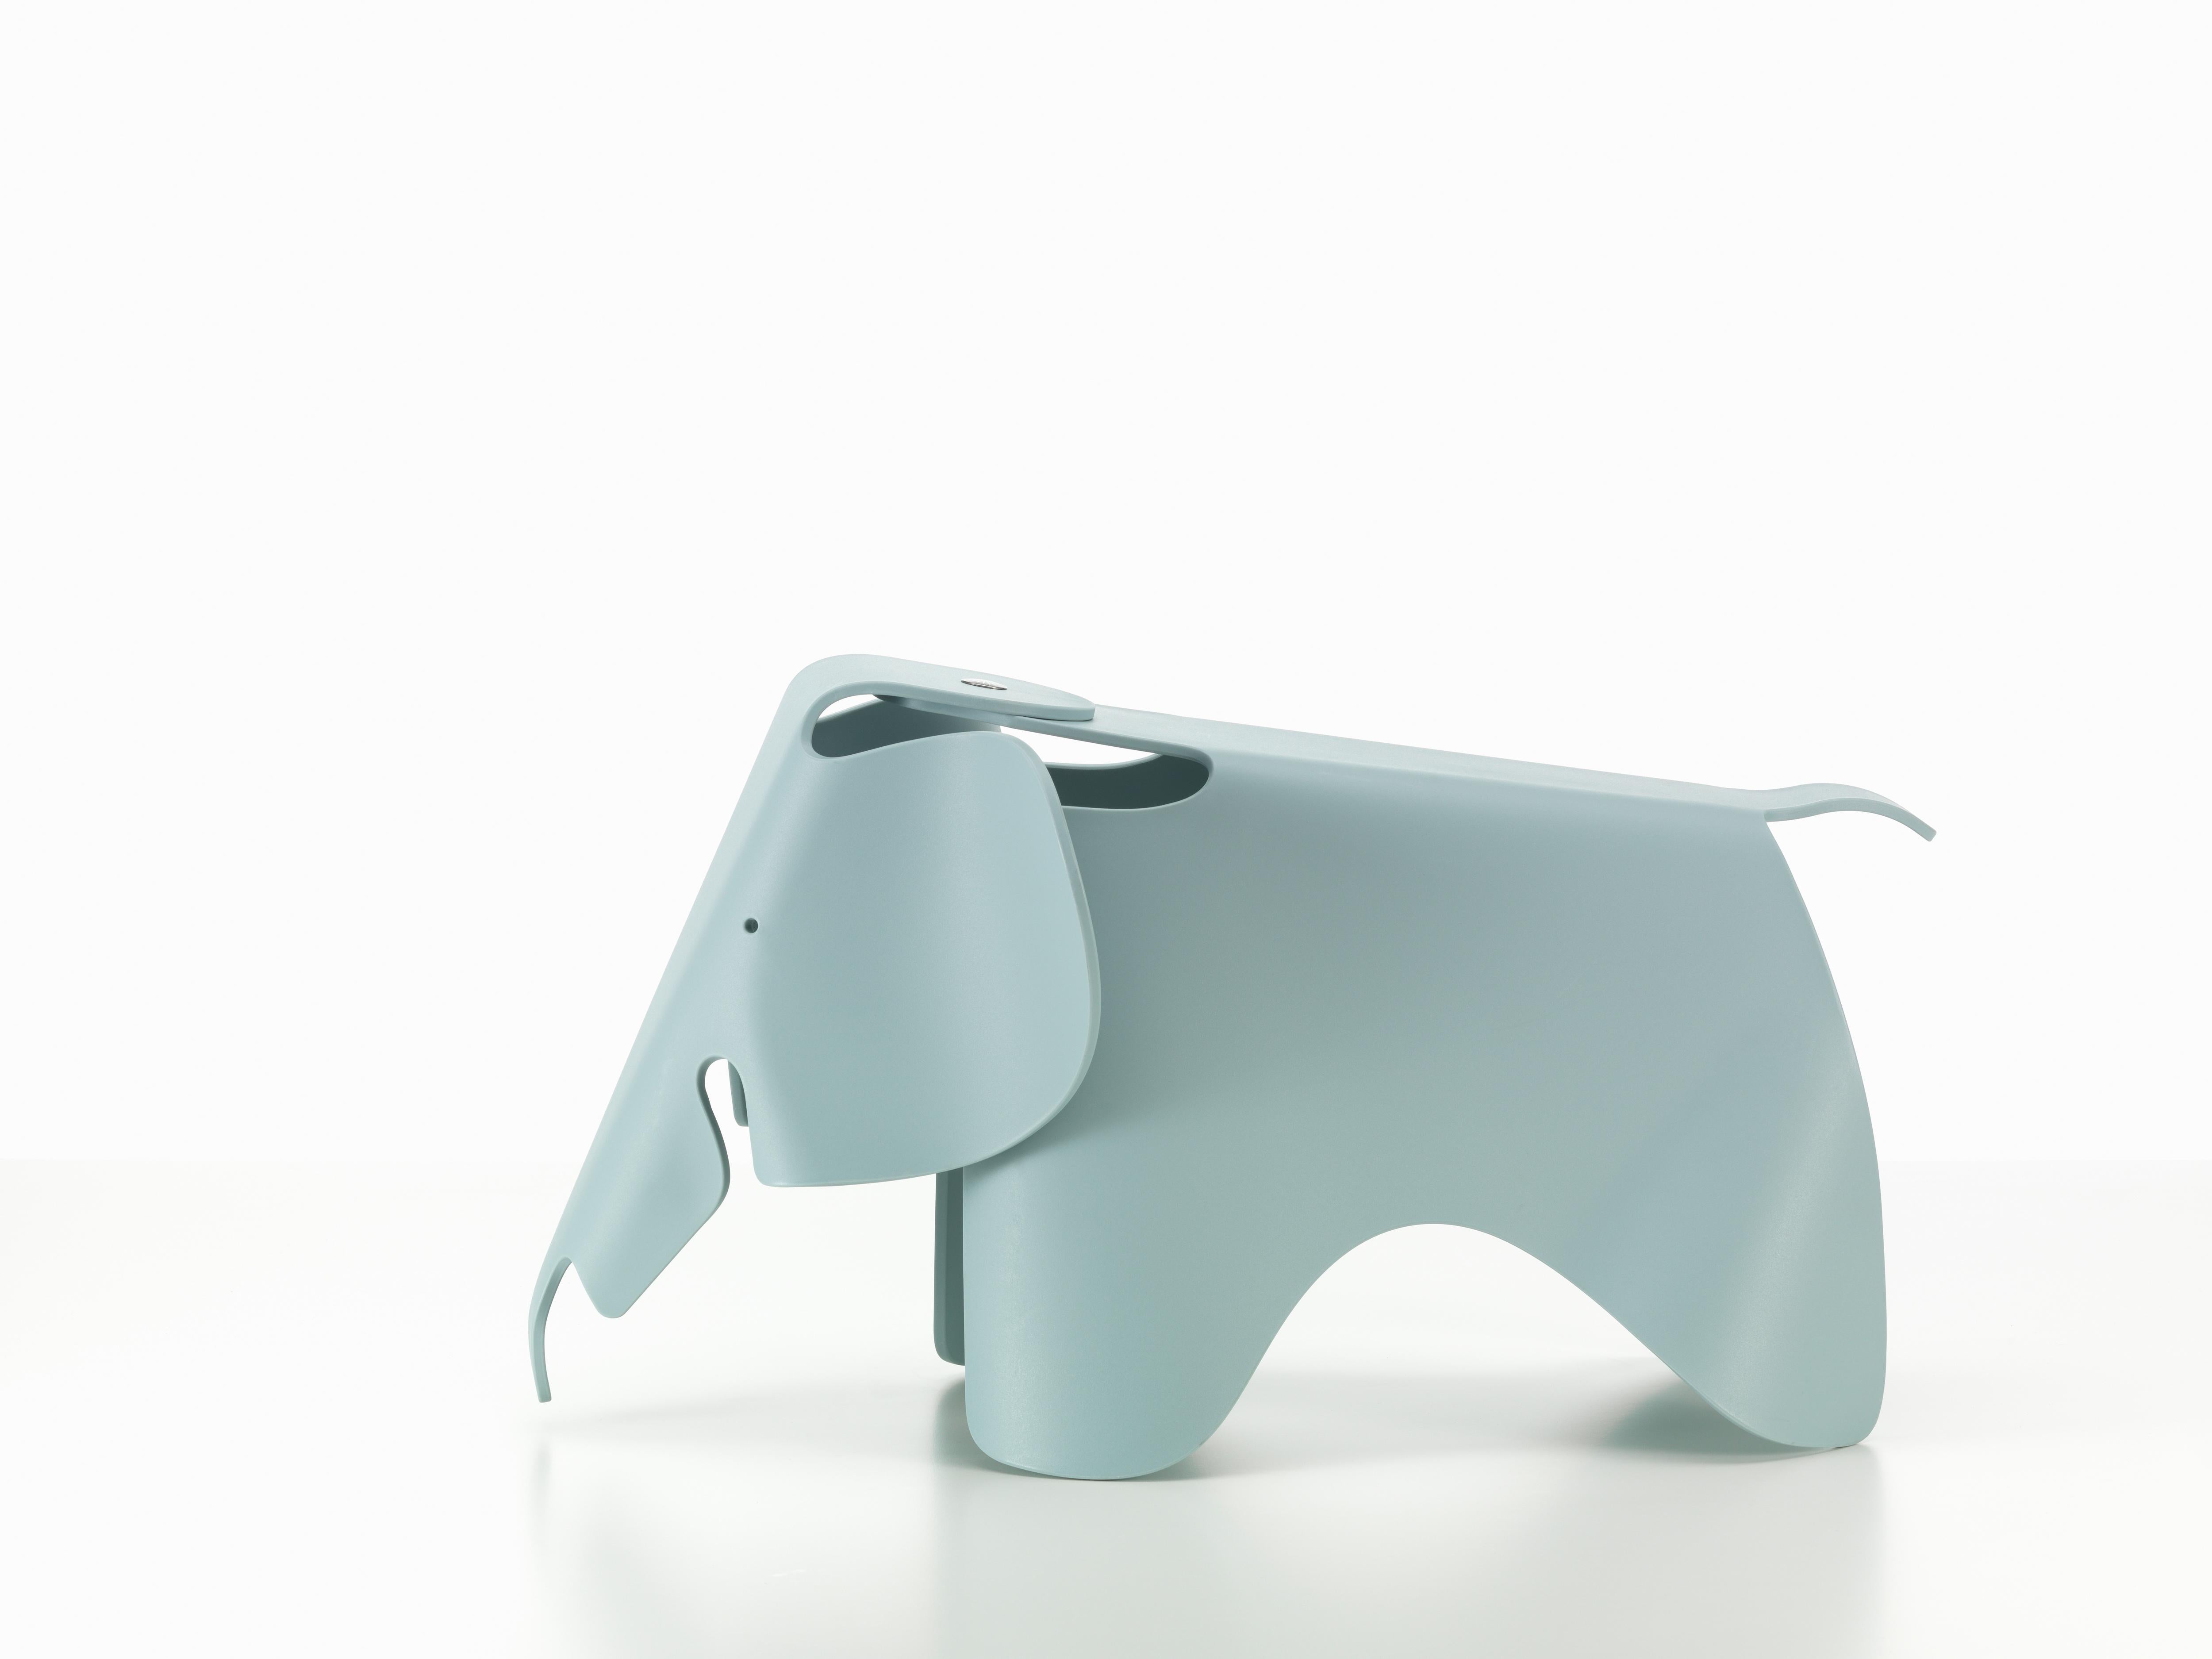 These items are currently only available in the United States.

Charles & Ray Eames developed a toy elephant made of plywood in 1945; however, this piece never went into production. A scaled-down version, the Eames Elephant (small) made of robust